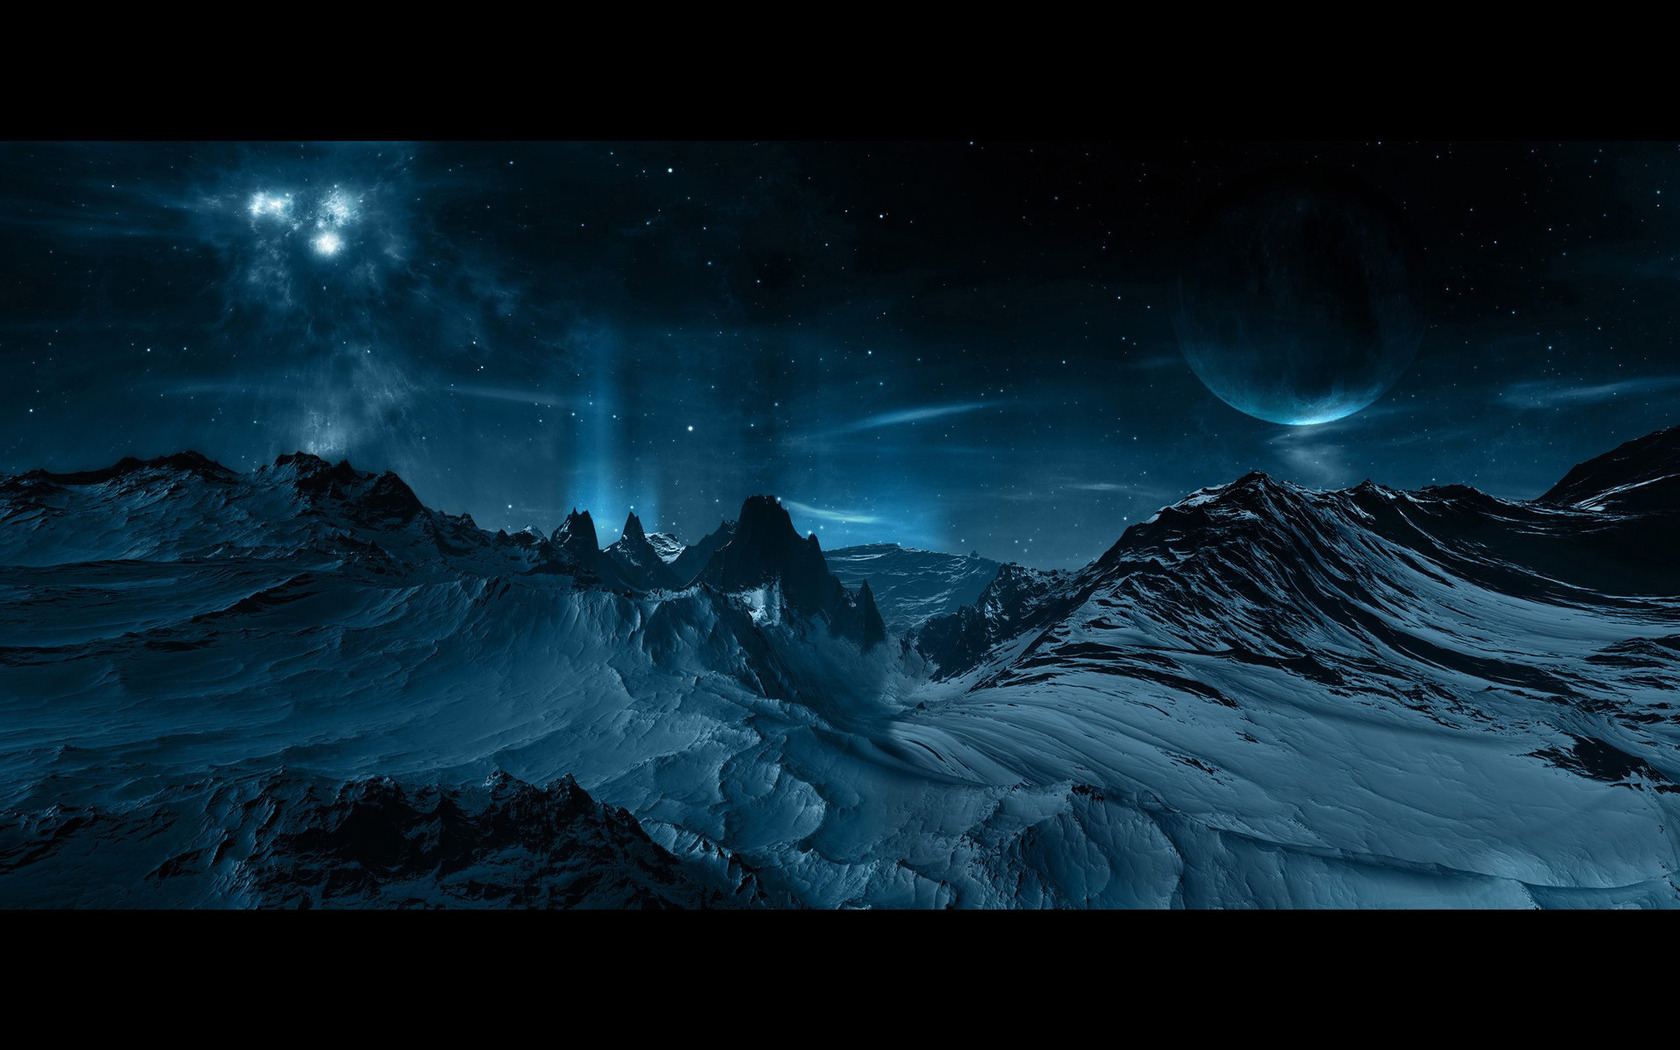 Download Planets above snowy mountains wallpaper 1680x1050